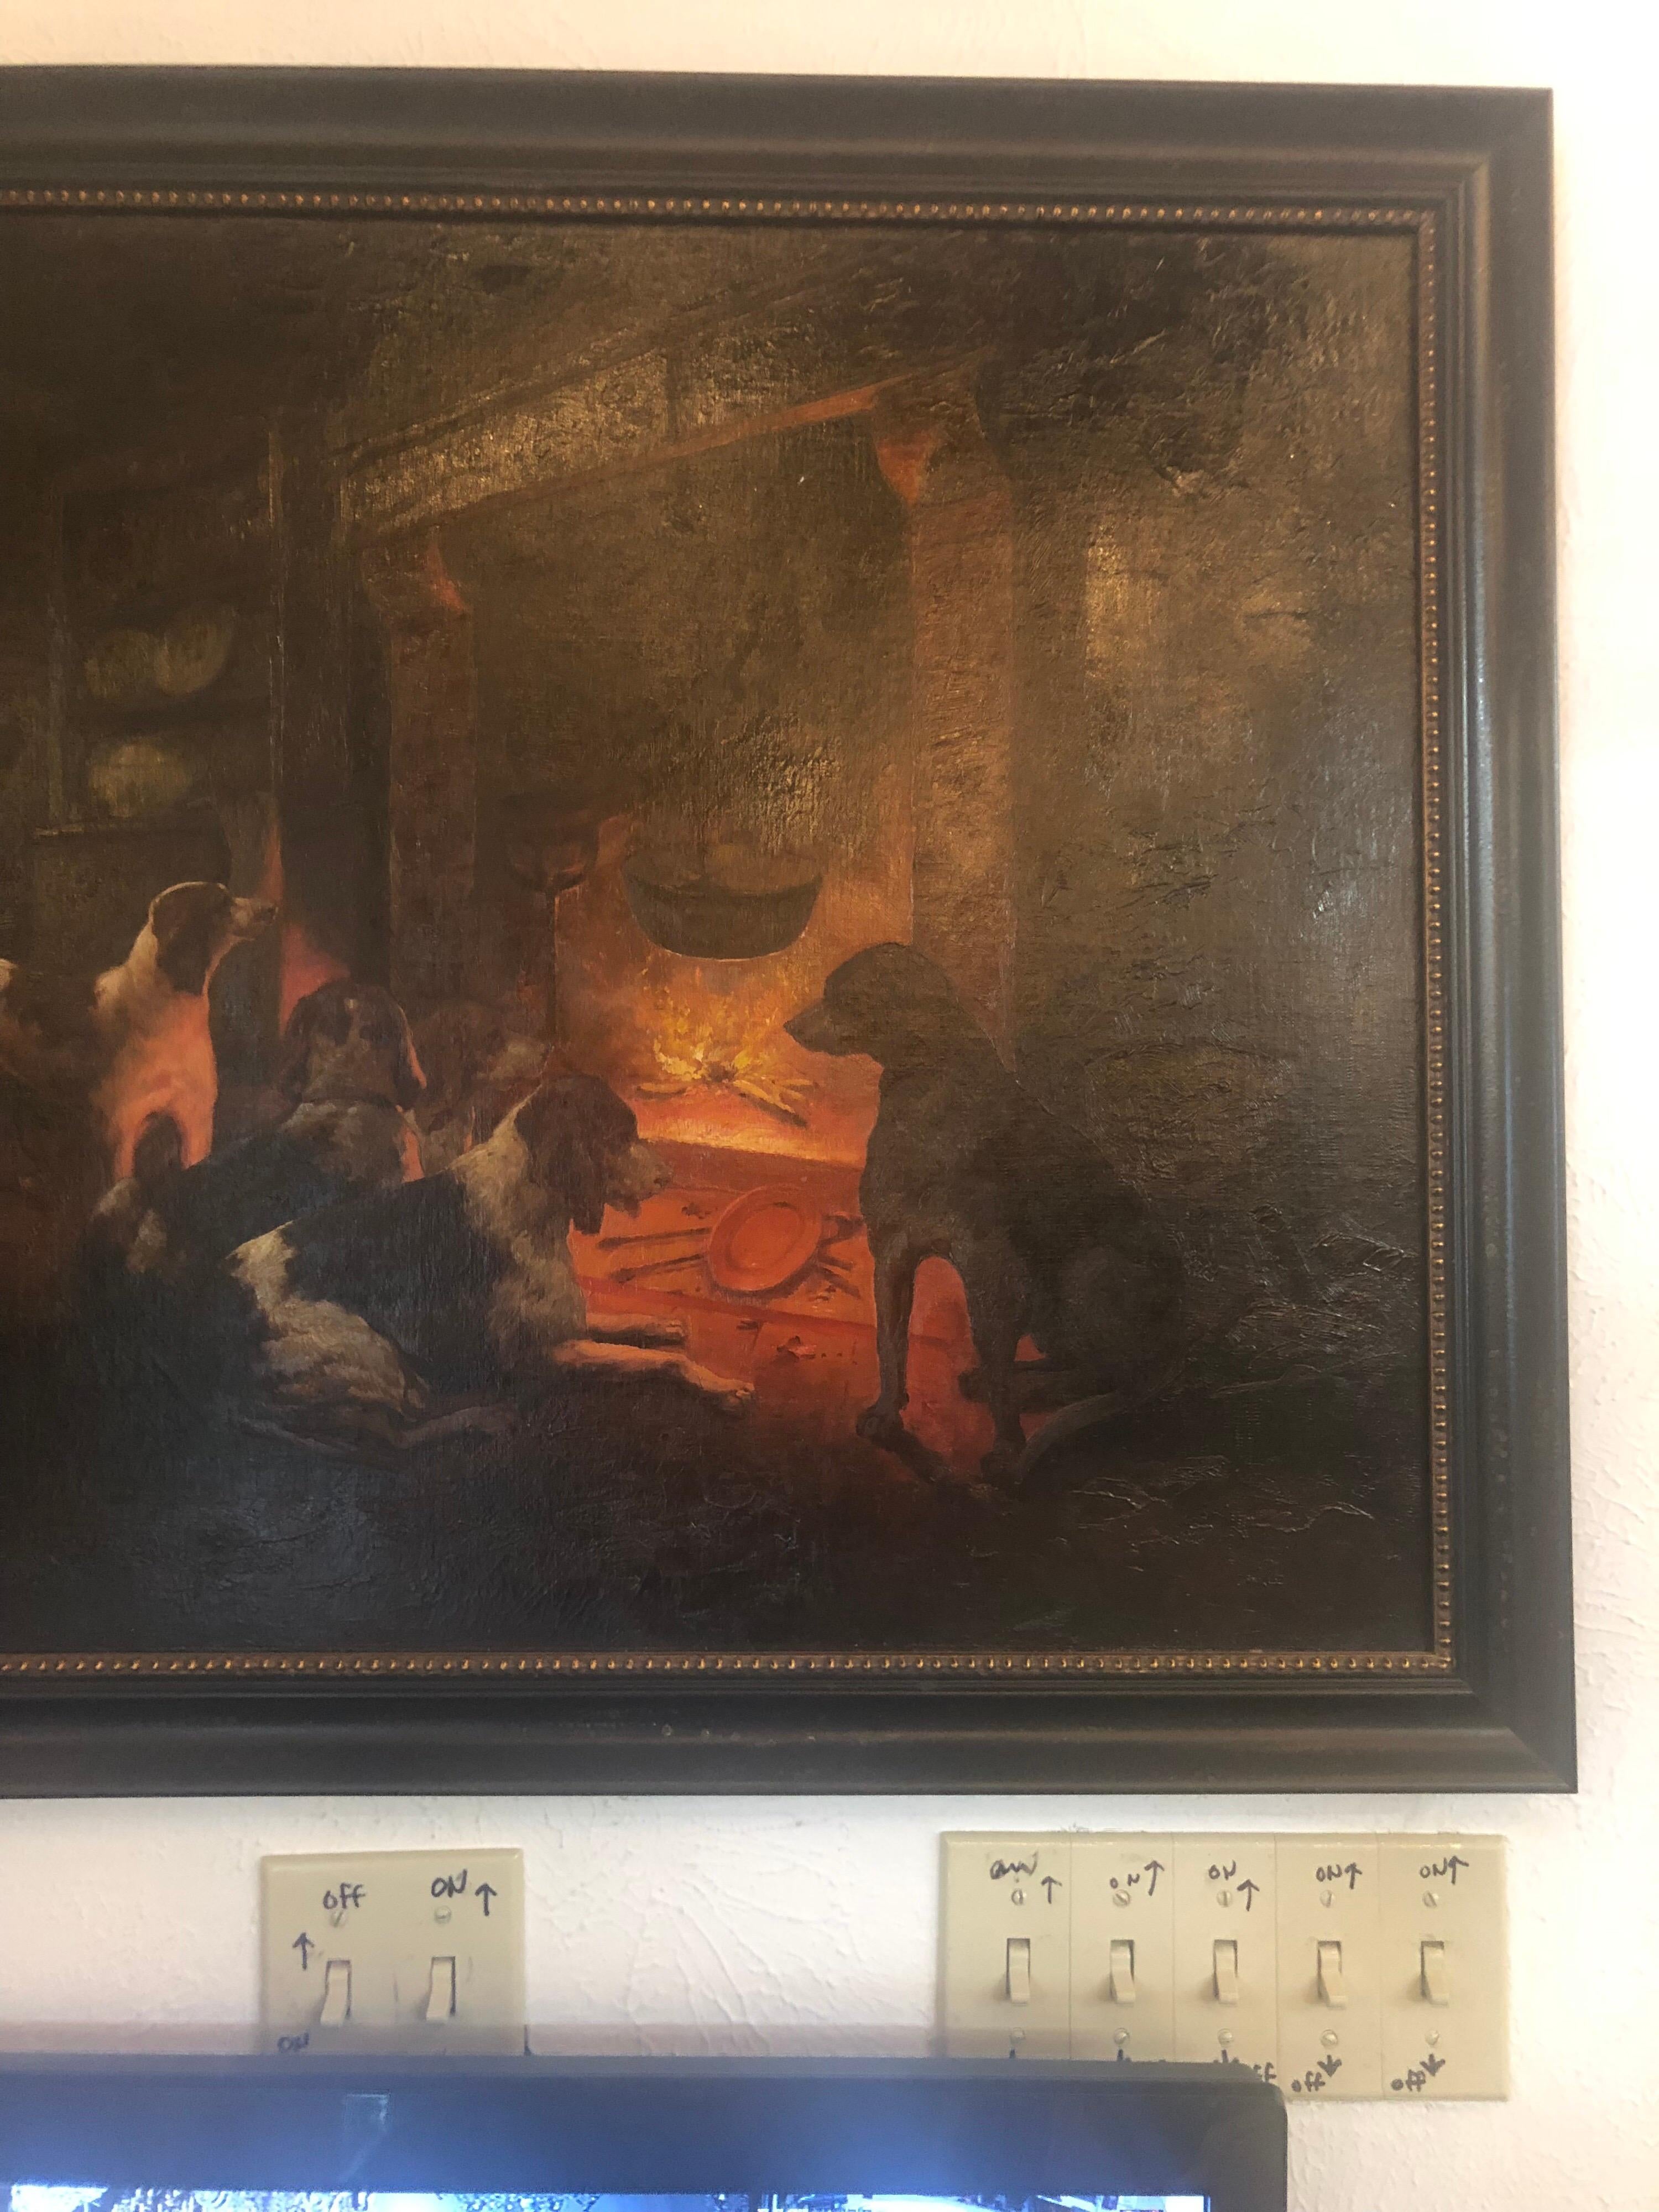 Beautiful 19th century Continental oil painting on canvas. Depicts a cozy scene of dogs by a fire.